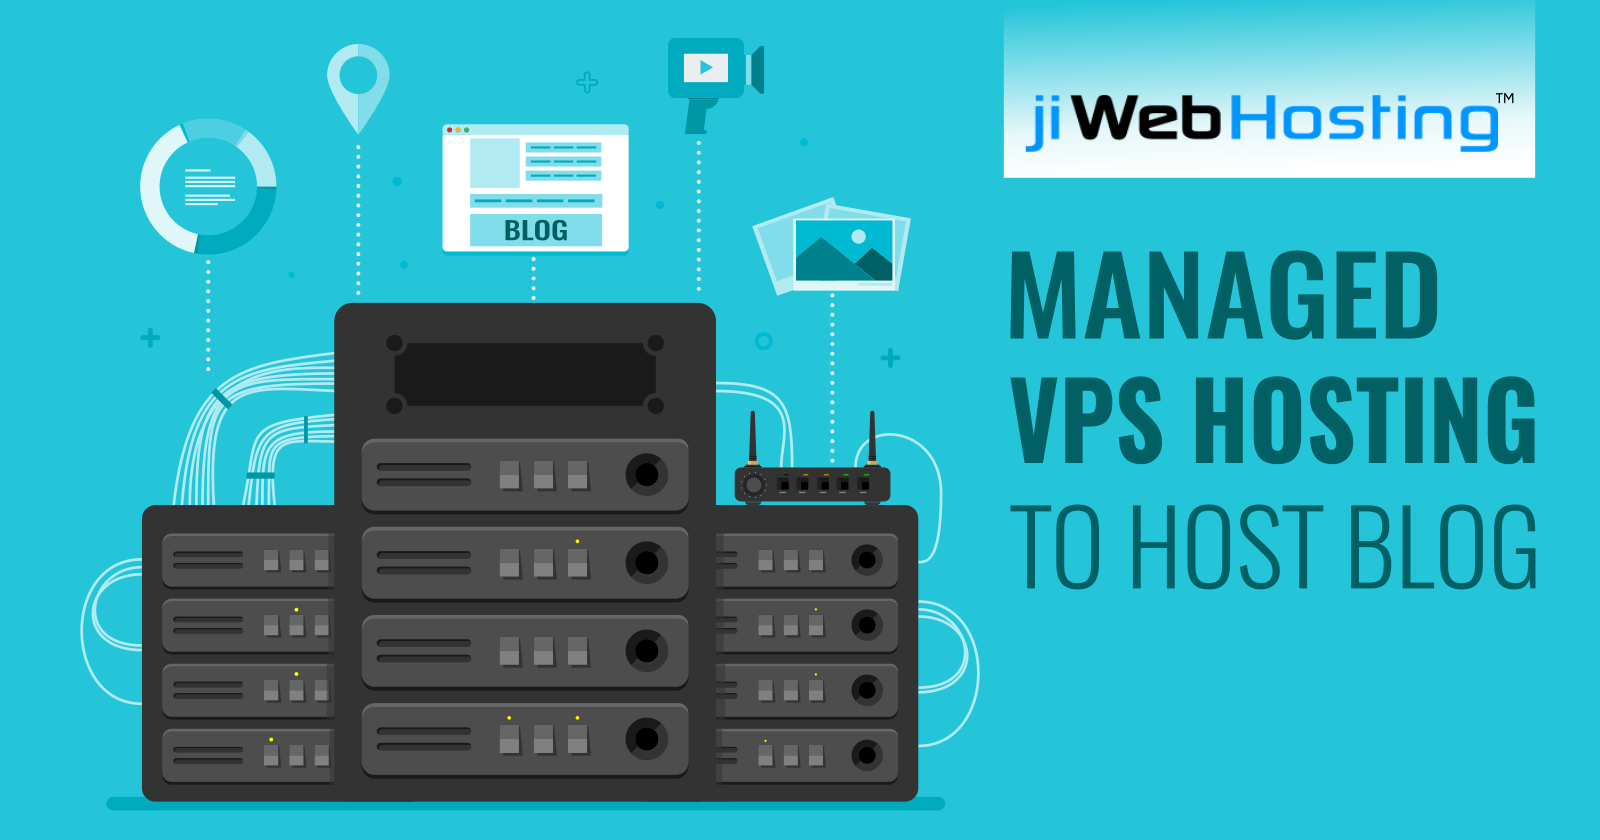 Managed VPS Hosting: A Better Option to Host Your Blog